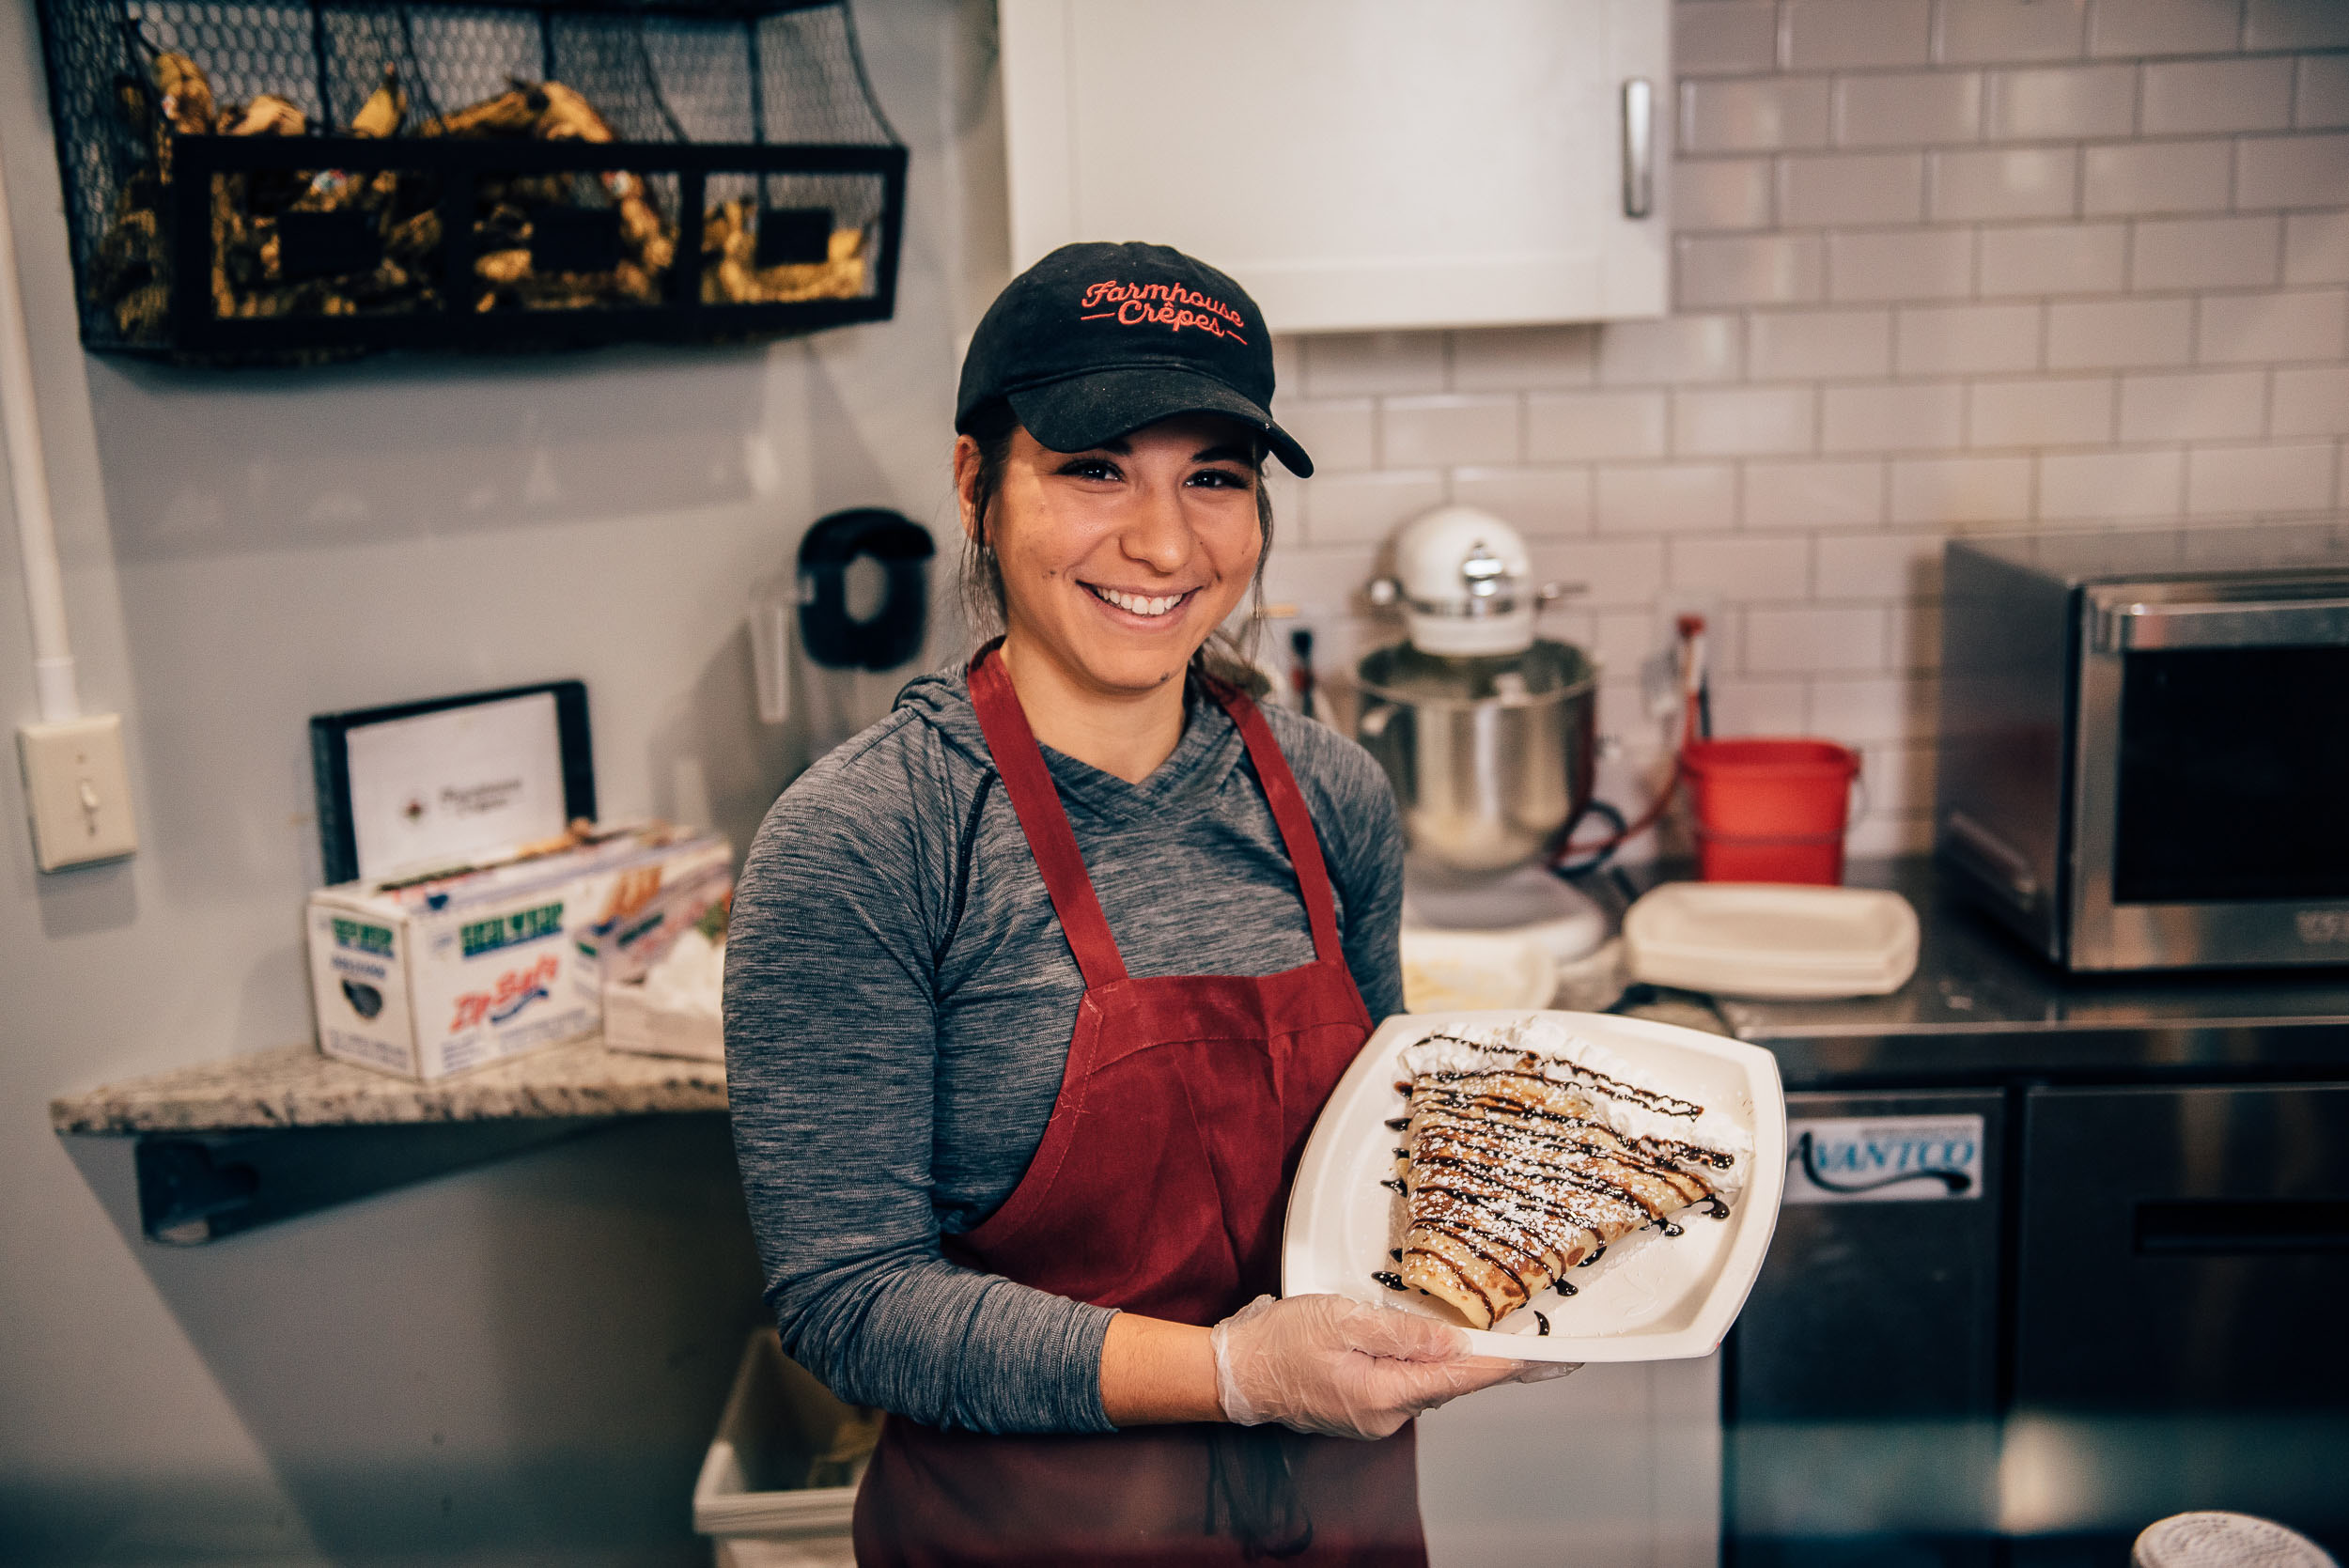 Finance major Ashley DeCarlo is a top student who holds down two jobs, a crepe expert, and – as head captain of the UConn cheerleading team – a self-described mom to 32. (Nate Oldham/UConn Photo)